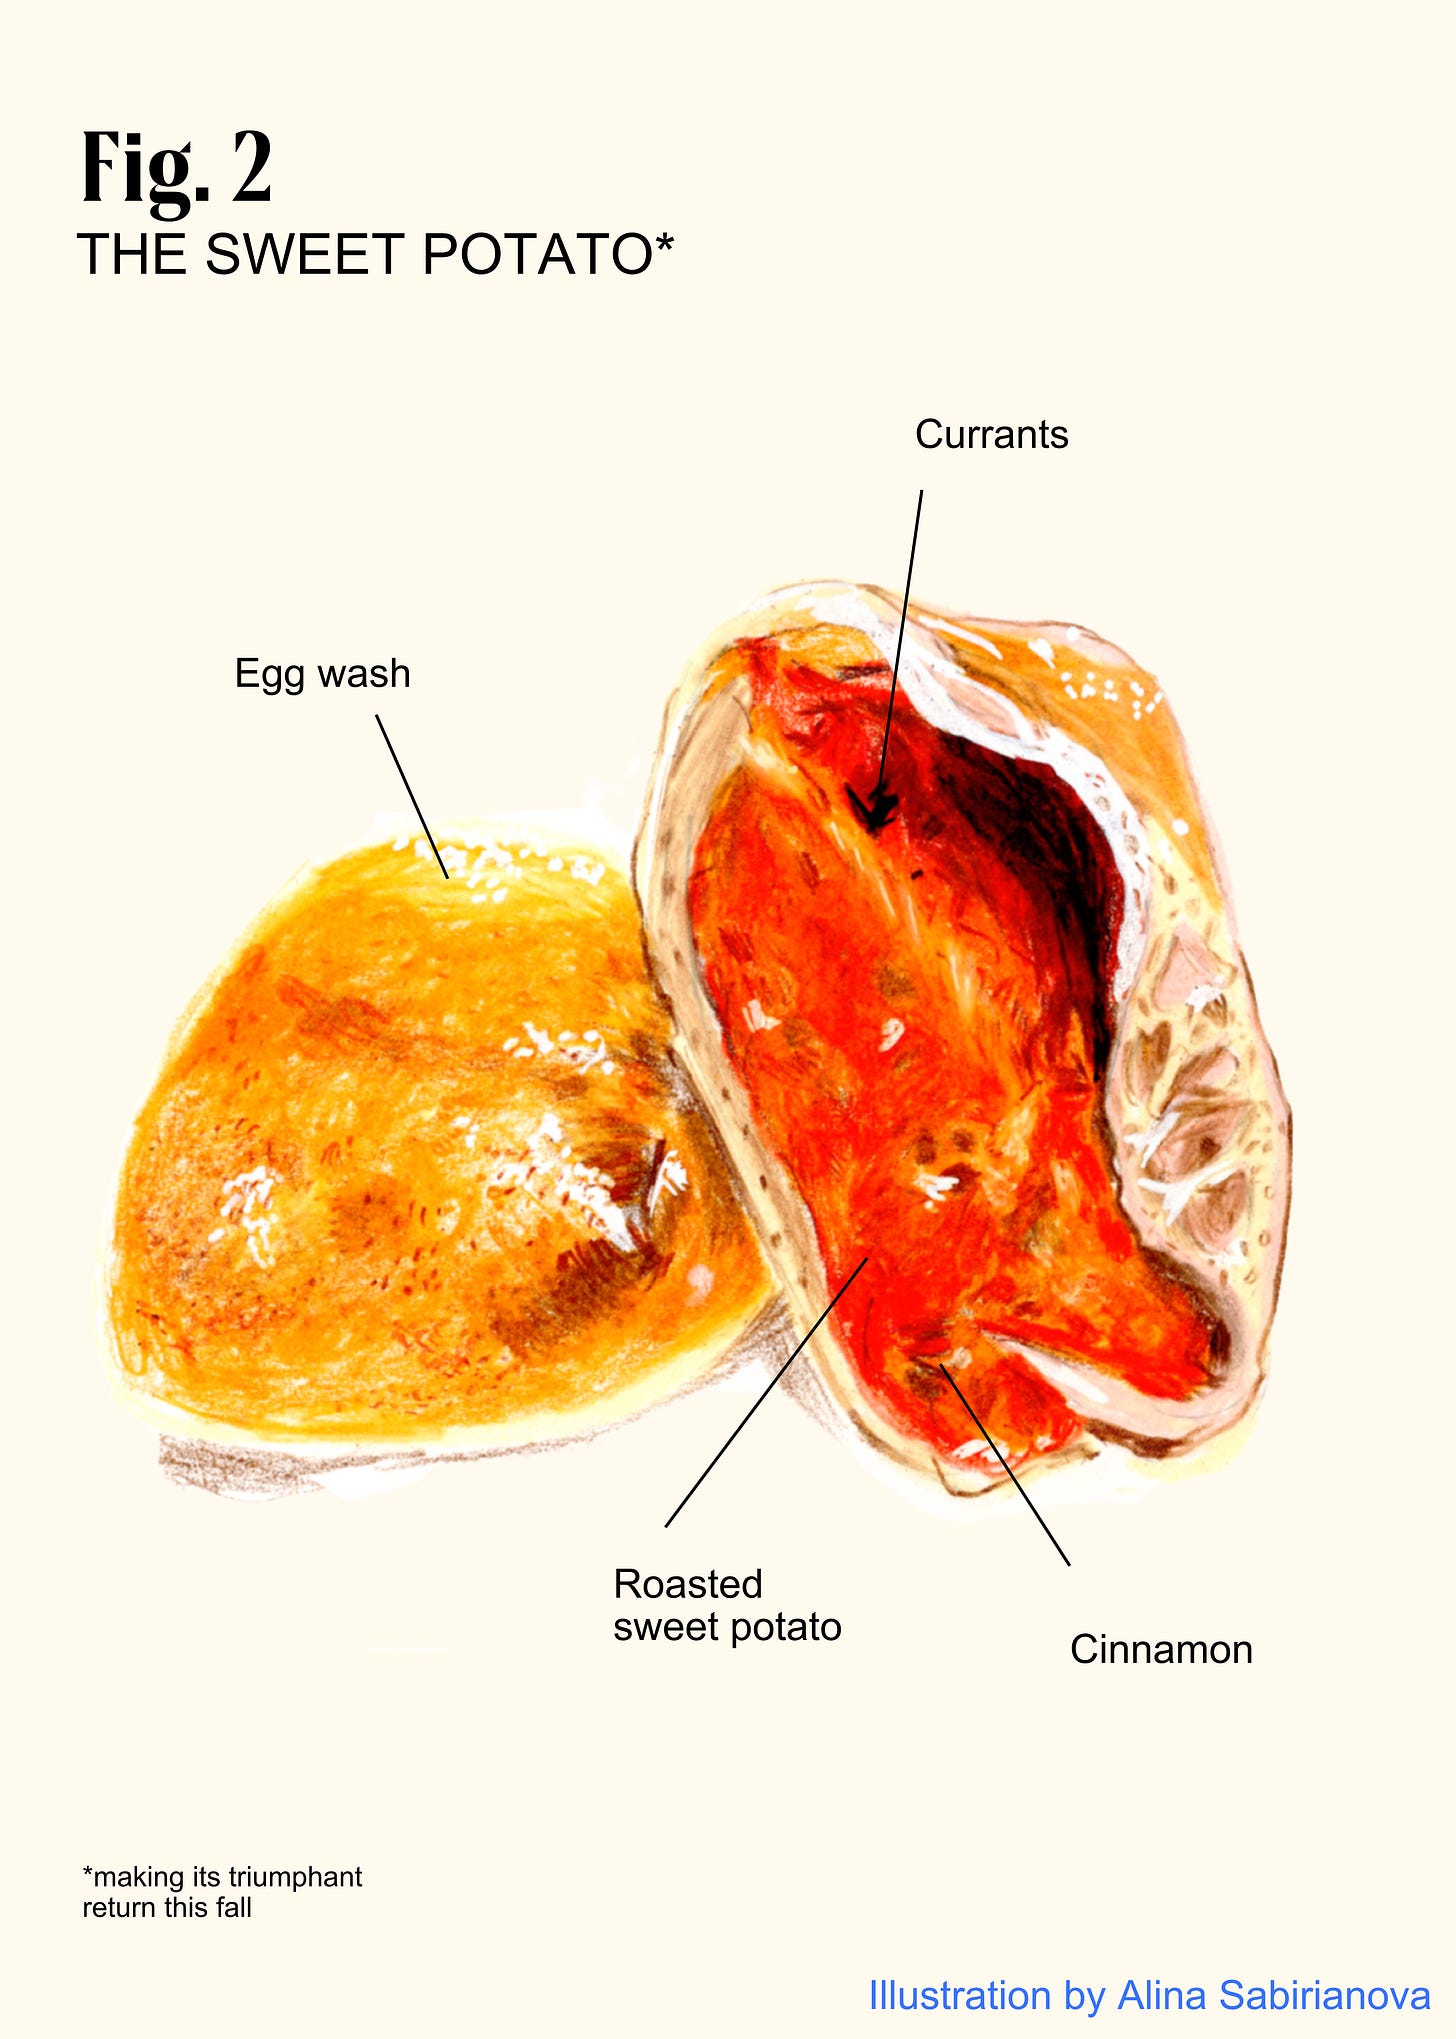 A drawing of a sweet potato knish and its components